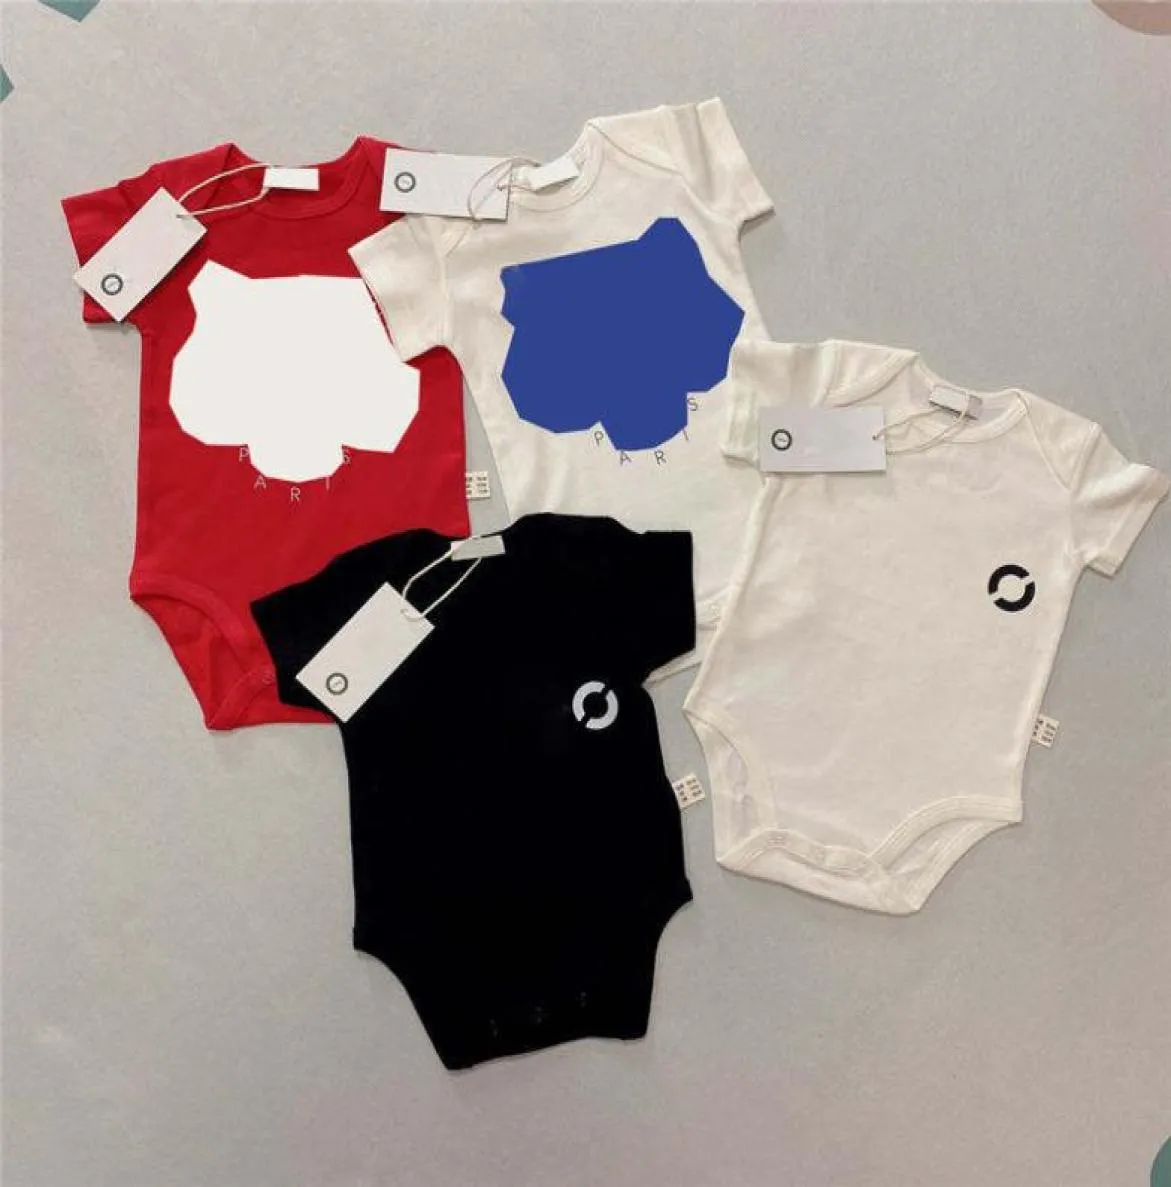 Baby Girls Boys Rompers Clothing Fashion Print Toddler Babys Onesies Cotton Short Sleeve Kids Jumpsuits Gifts8133475